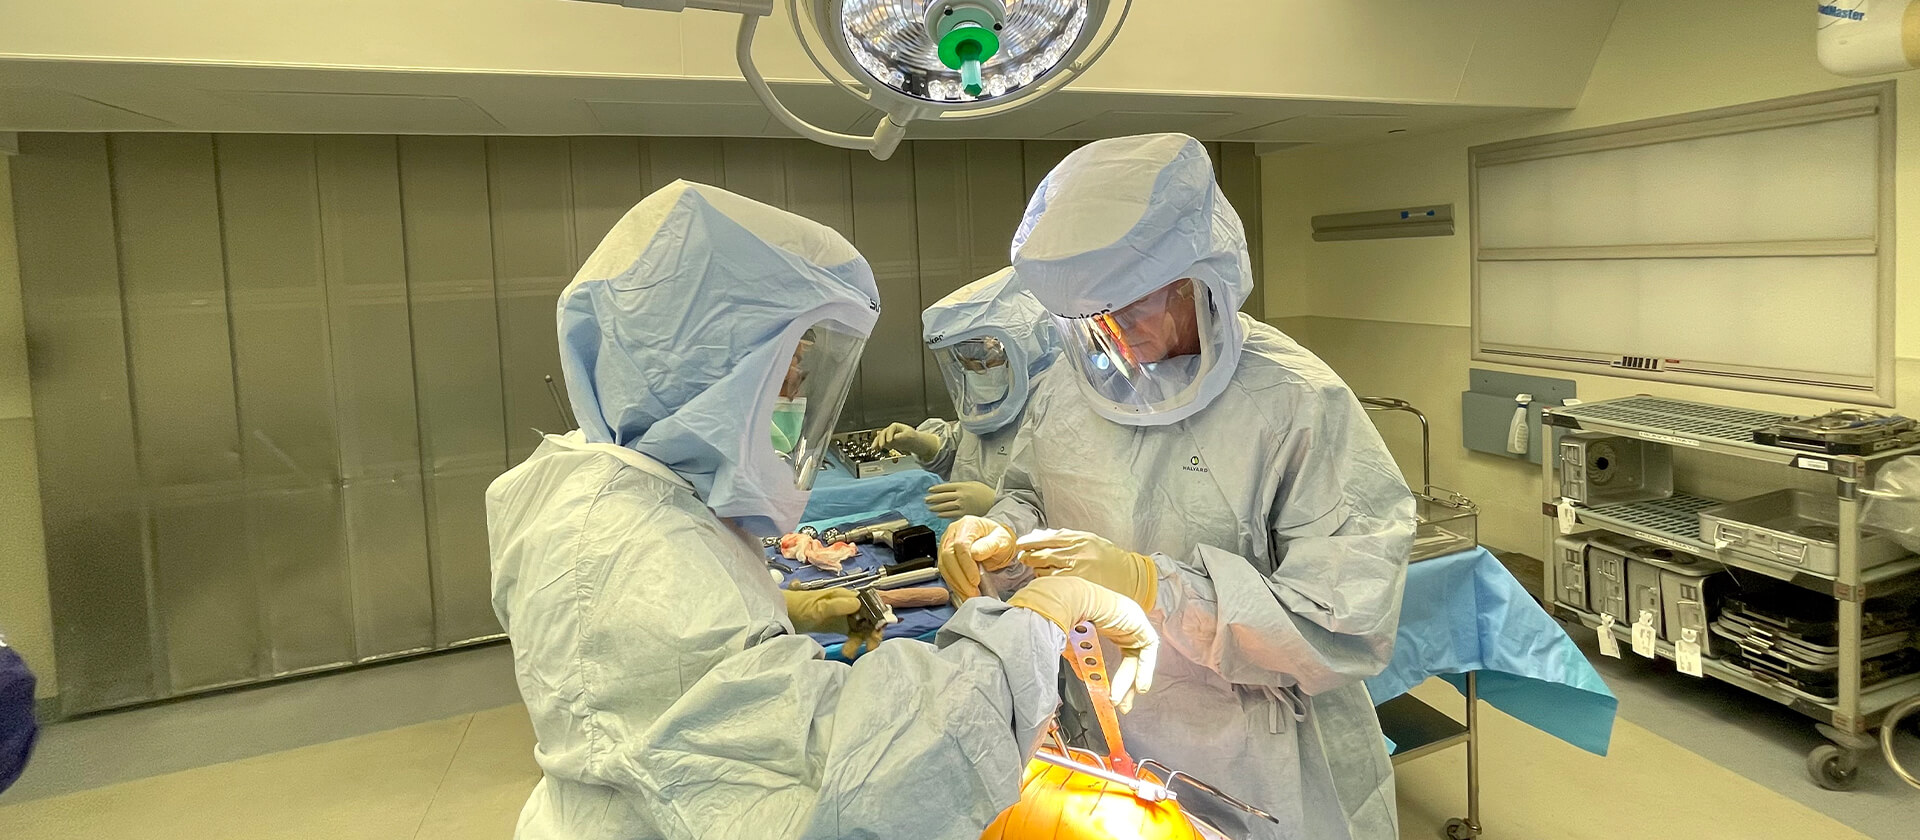 Dr. Leone in operating room performing knee surgery